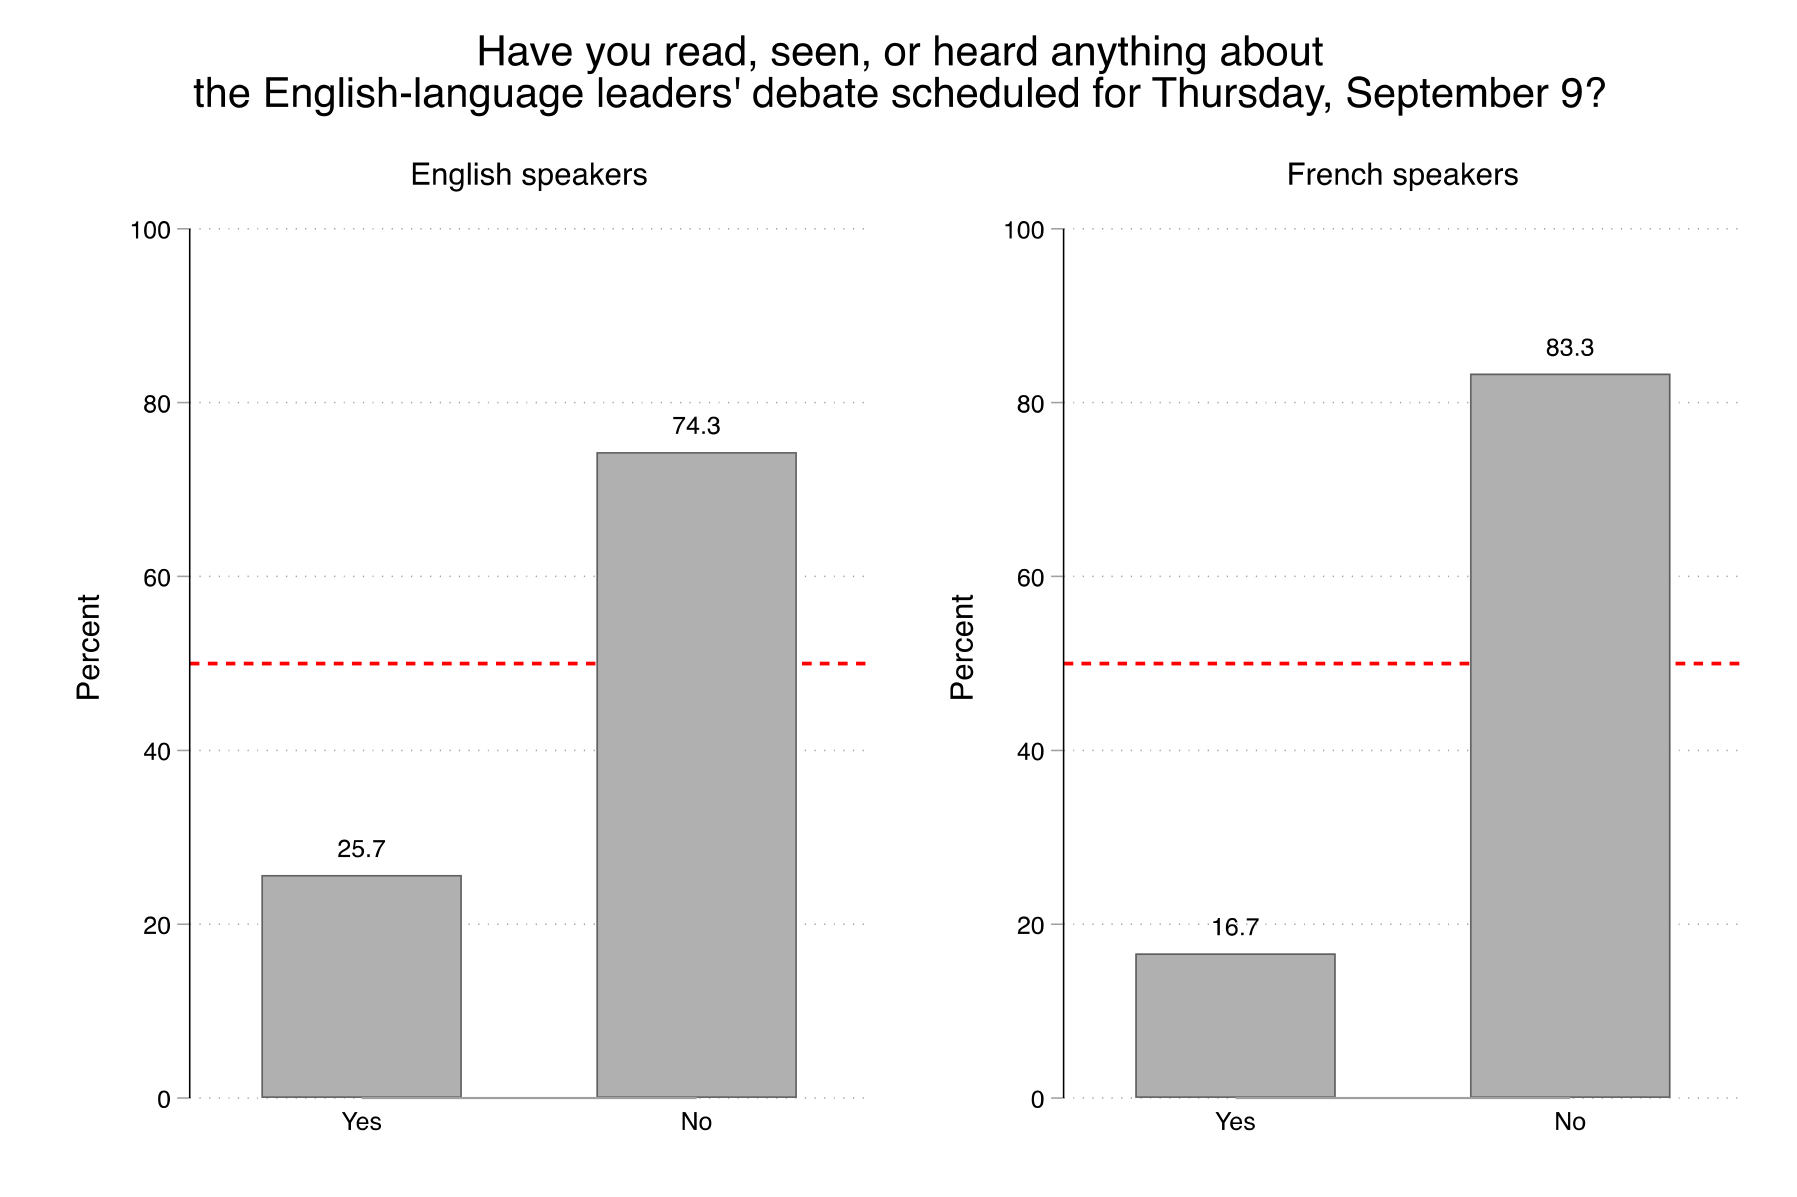 Figure 2. This figure shows awareness in the lead up to the English debate:  26% of English speakers, and 17% of French speakers, were aware of the English debate.